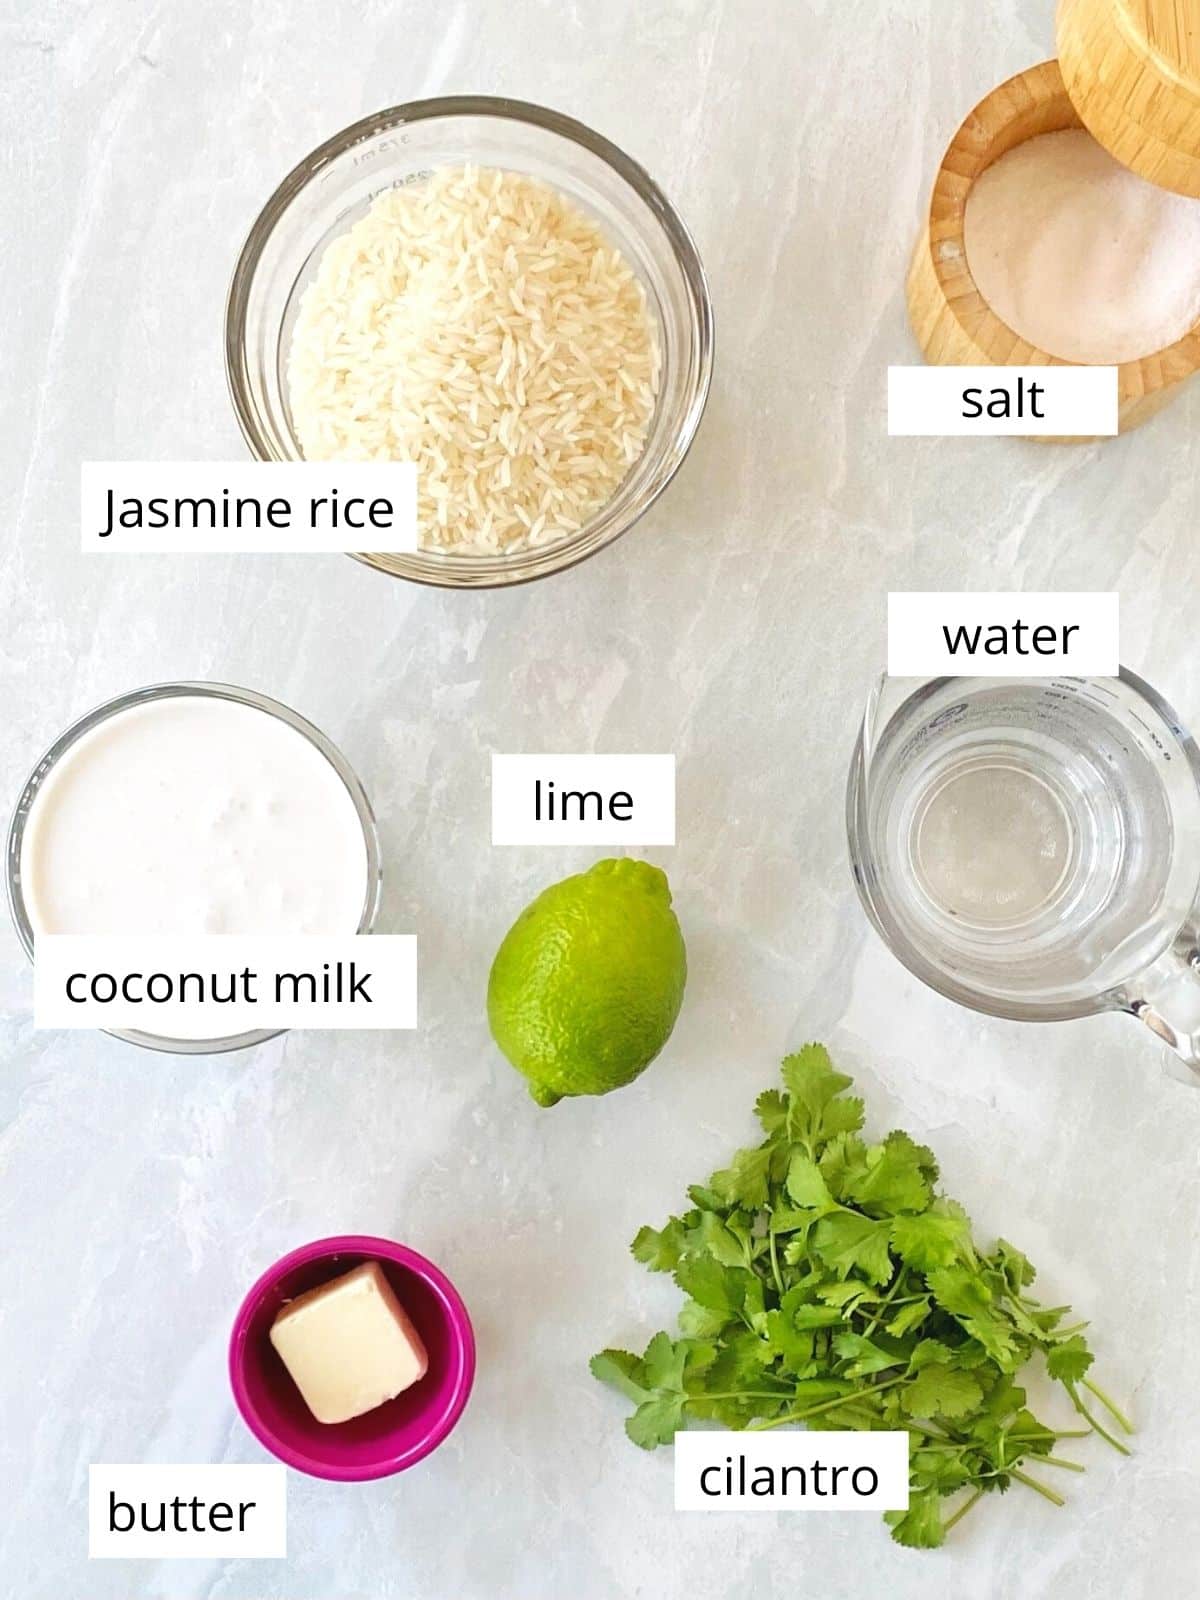 ingredients for cilantro lime coconut rice